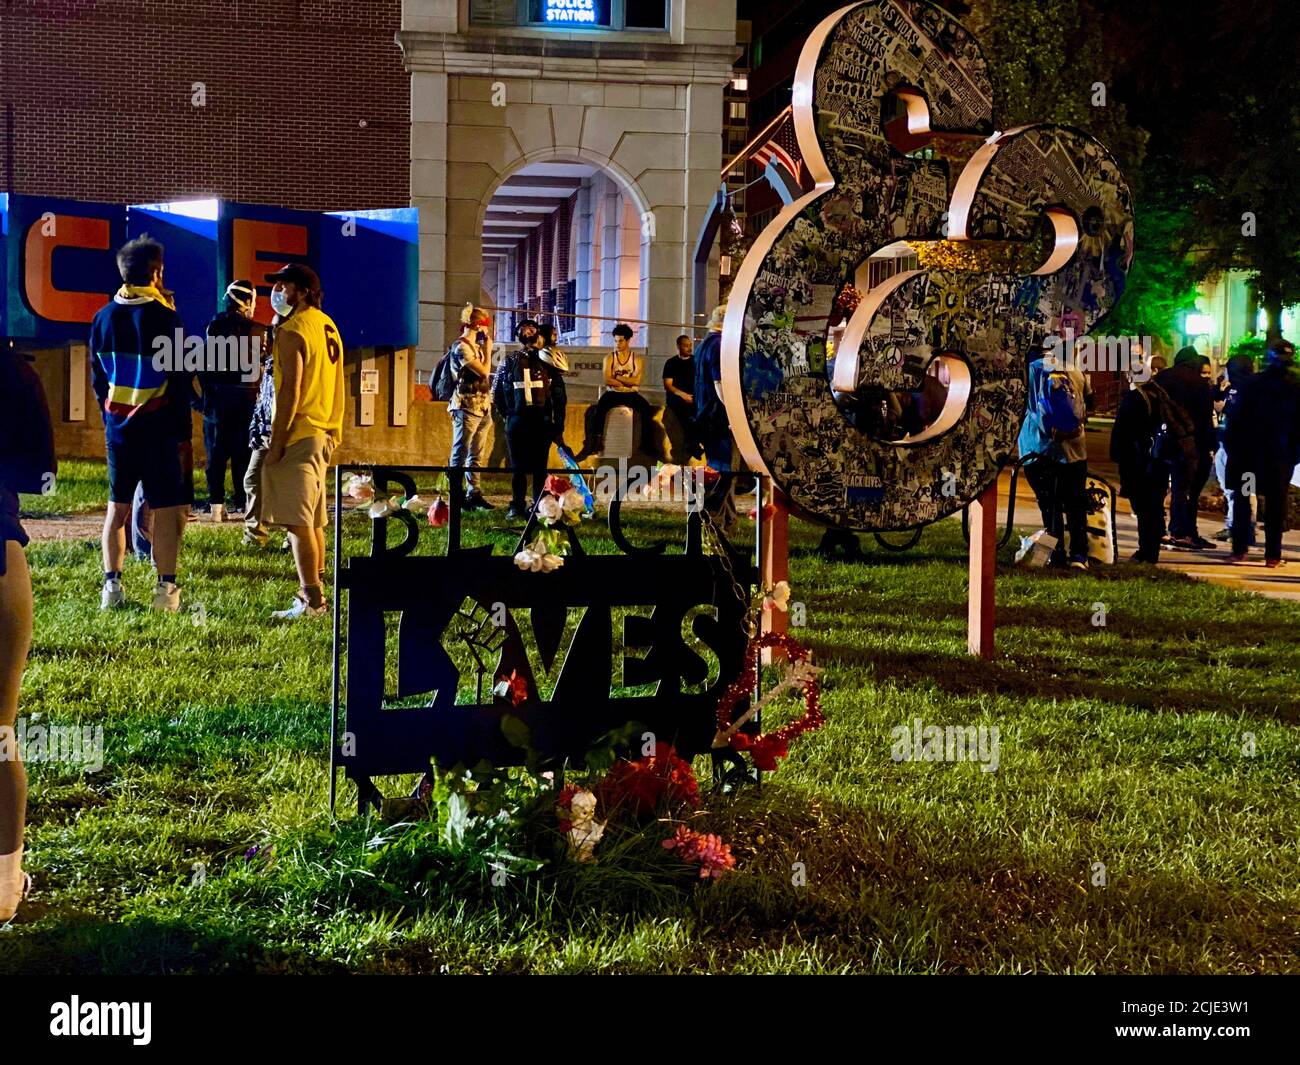 Lancaster, Pennsylvania, USA. 14th Sep, 2020. Second night of protests following Ricardo Munoz's shooting were mostly peaceful, yet at around 1:00 am a protestor shook the fence and called the police names, drawing out a dozens police who arrested one of them. Police also arrested a 16 hour year old an hour or so before this photo. By 2:00 am, most people had gone home. Credit: Amy Katz/ZUMA Wire/Alamy Live News Stock Photo